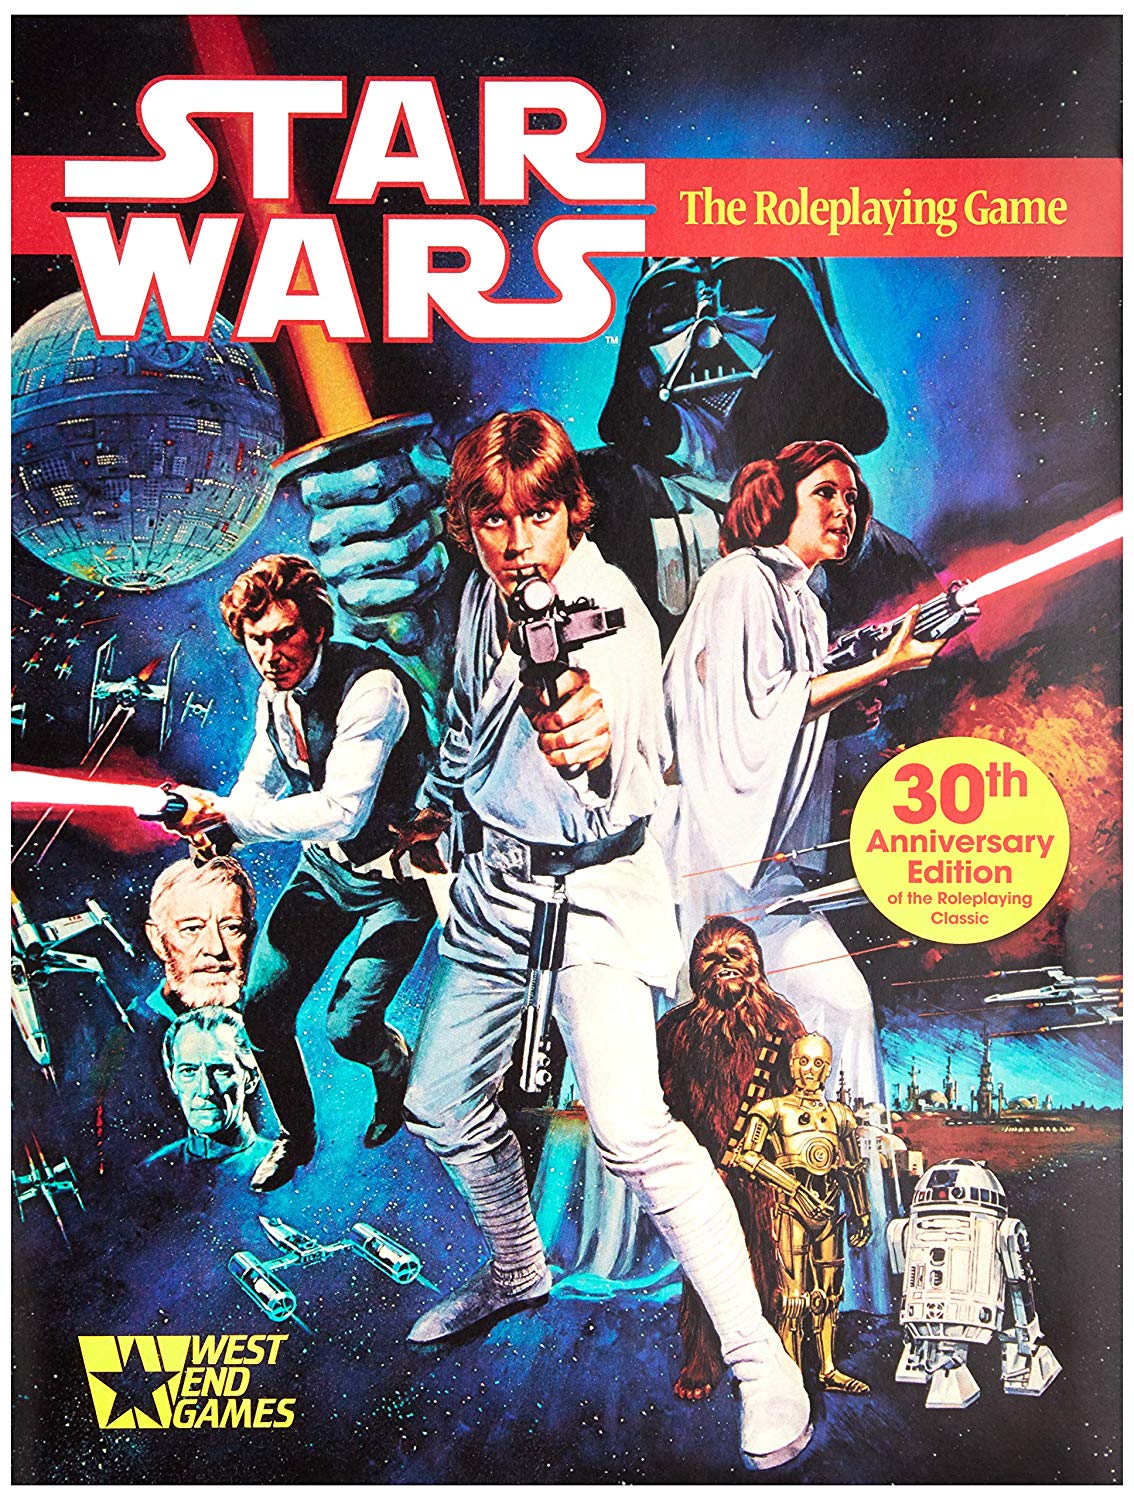 RPG Review: West End Games Star Wars - Charmstone